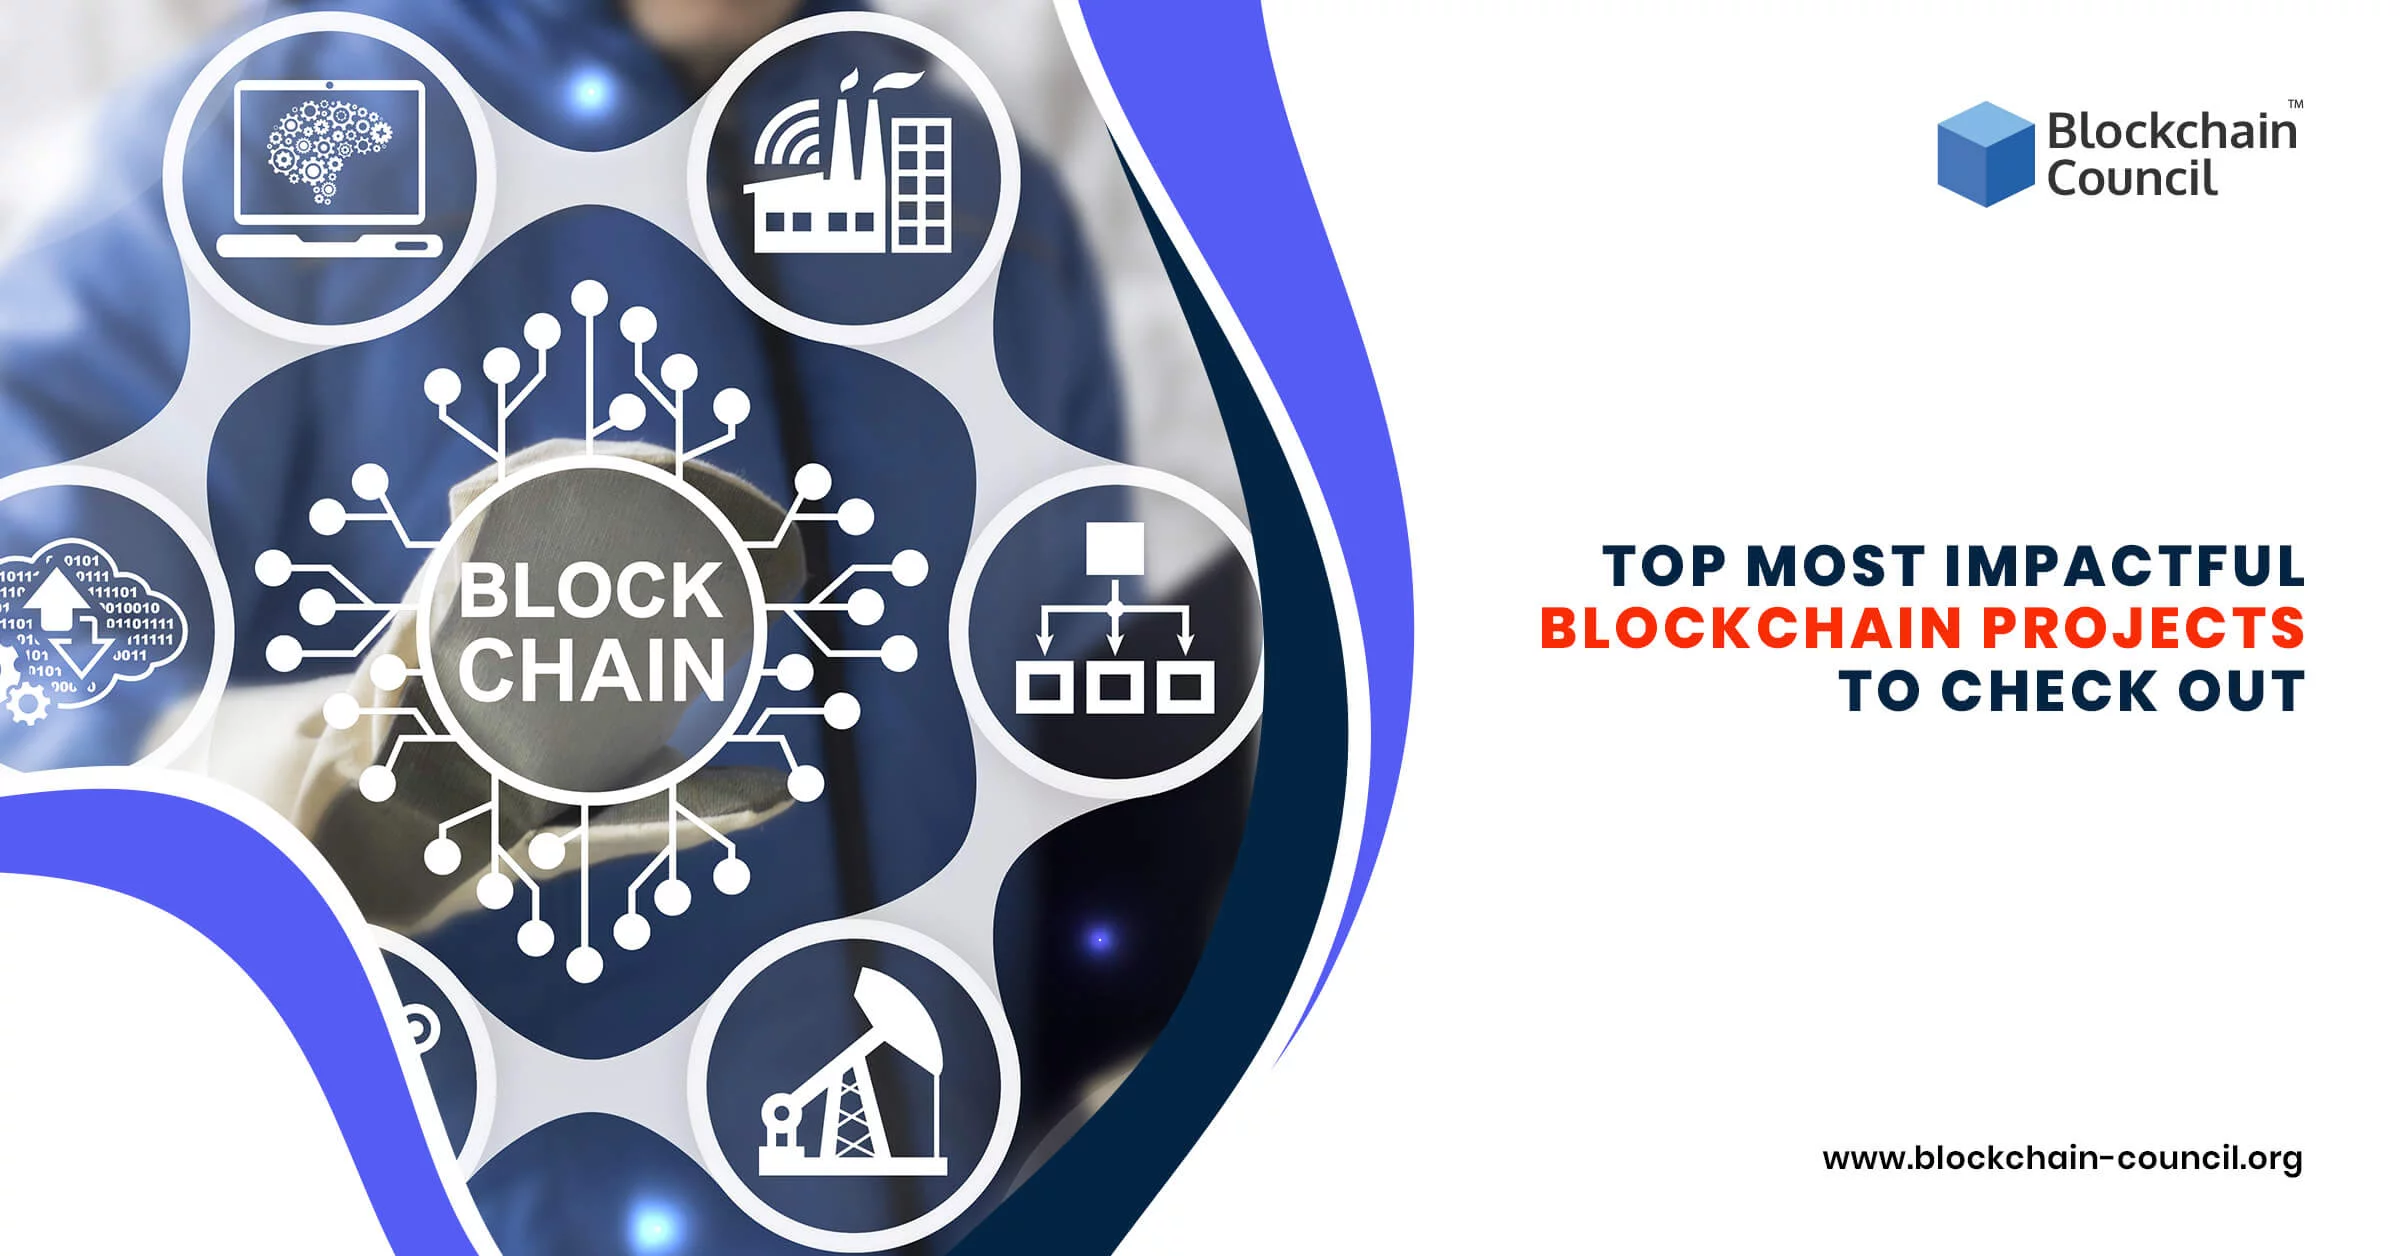 The-Top-Most-Impactful-Blockchain-Projects-to-Check-Out